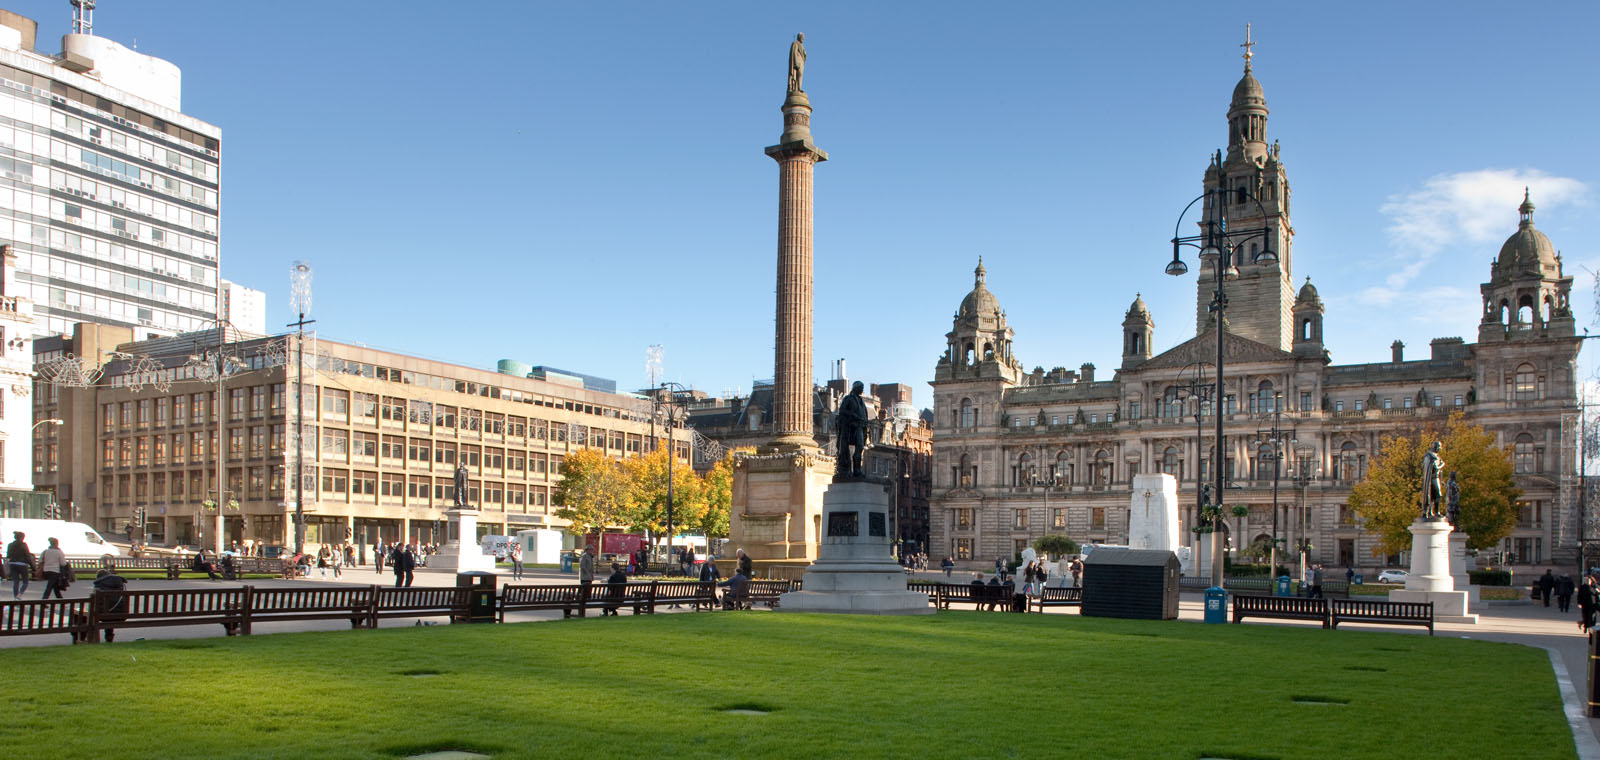 George Square, the heart of Glasgow